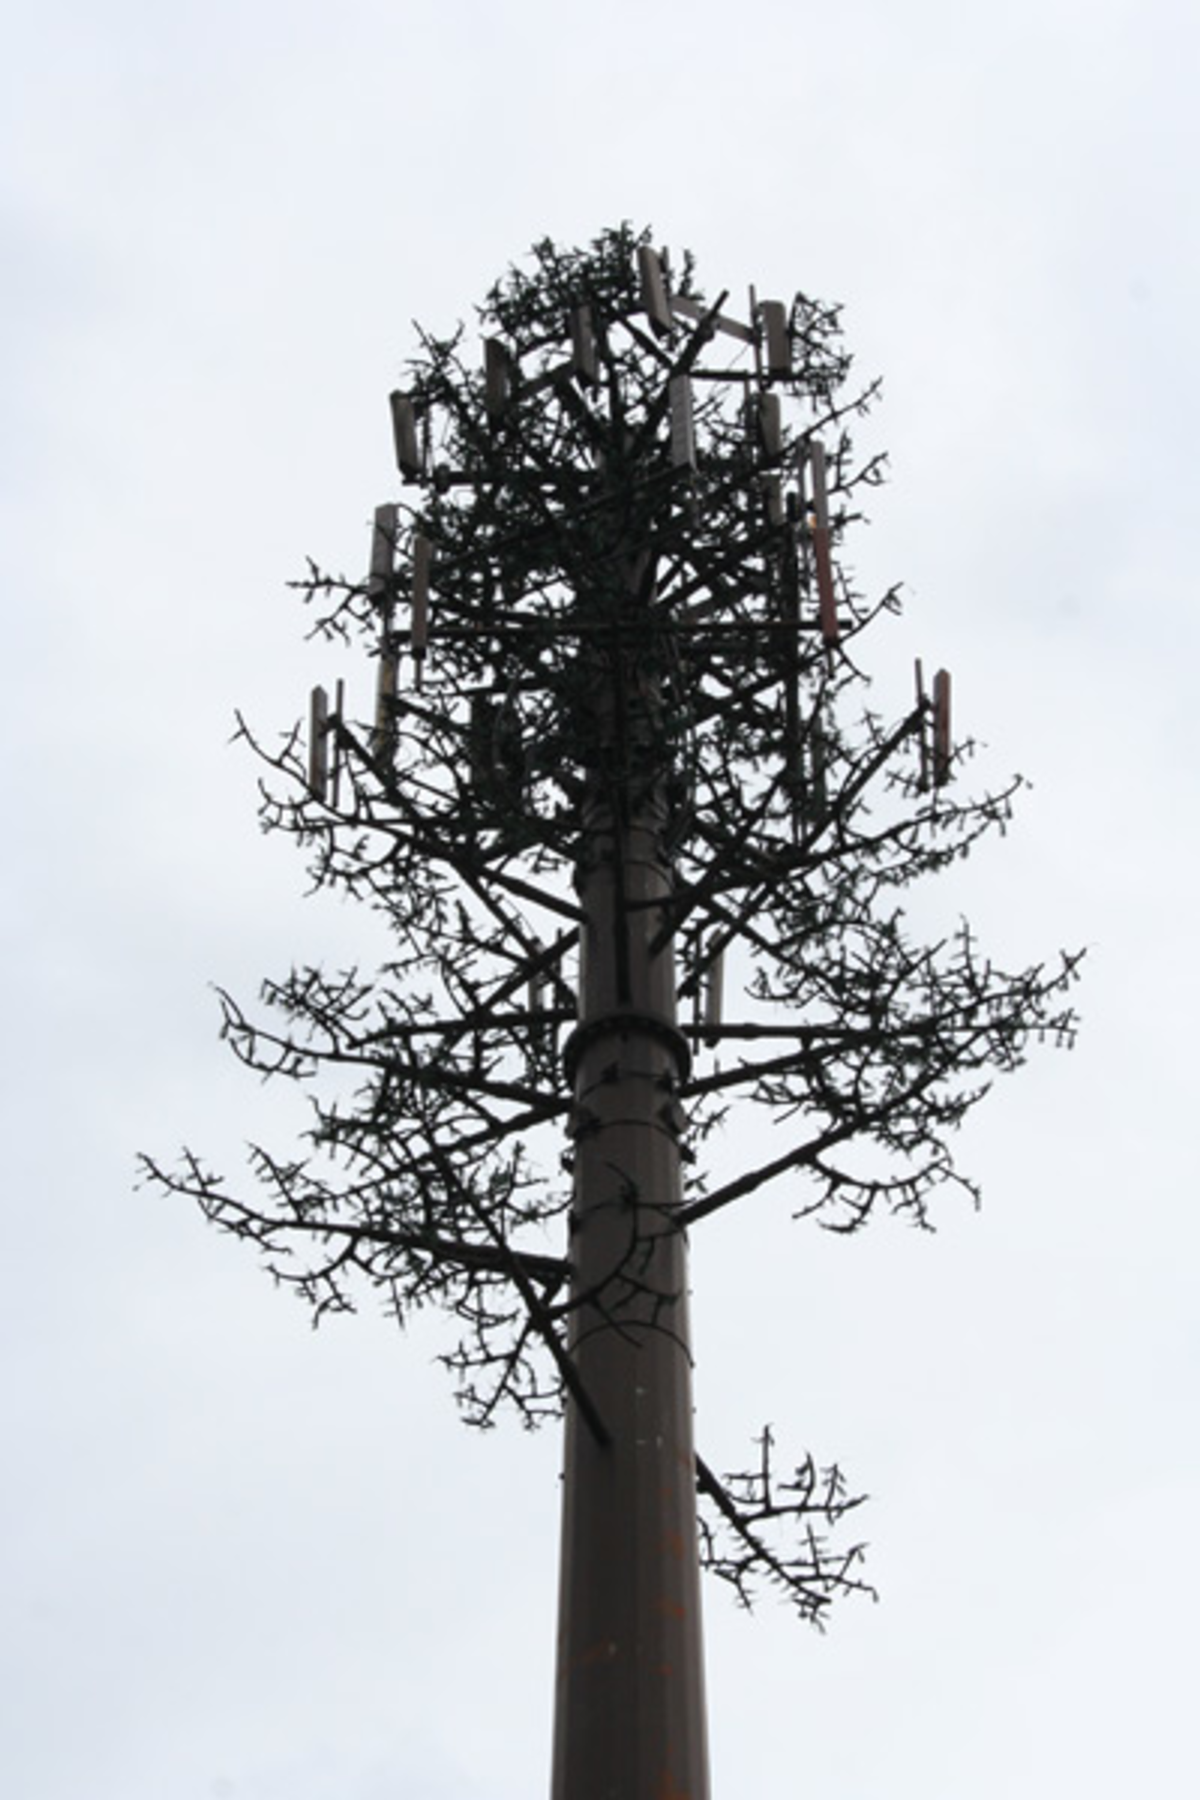 BEST CHEESY URBAN CAMOUFLAGE: That gussied-up cell-phone tower